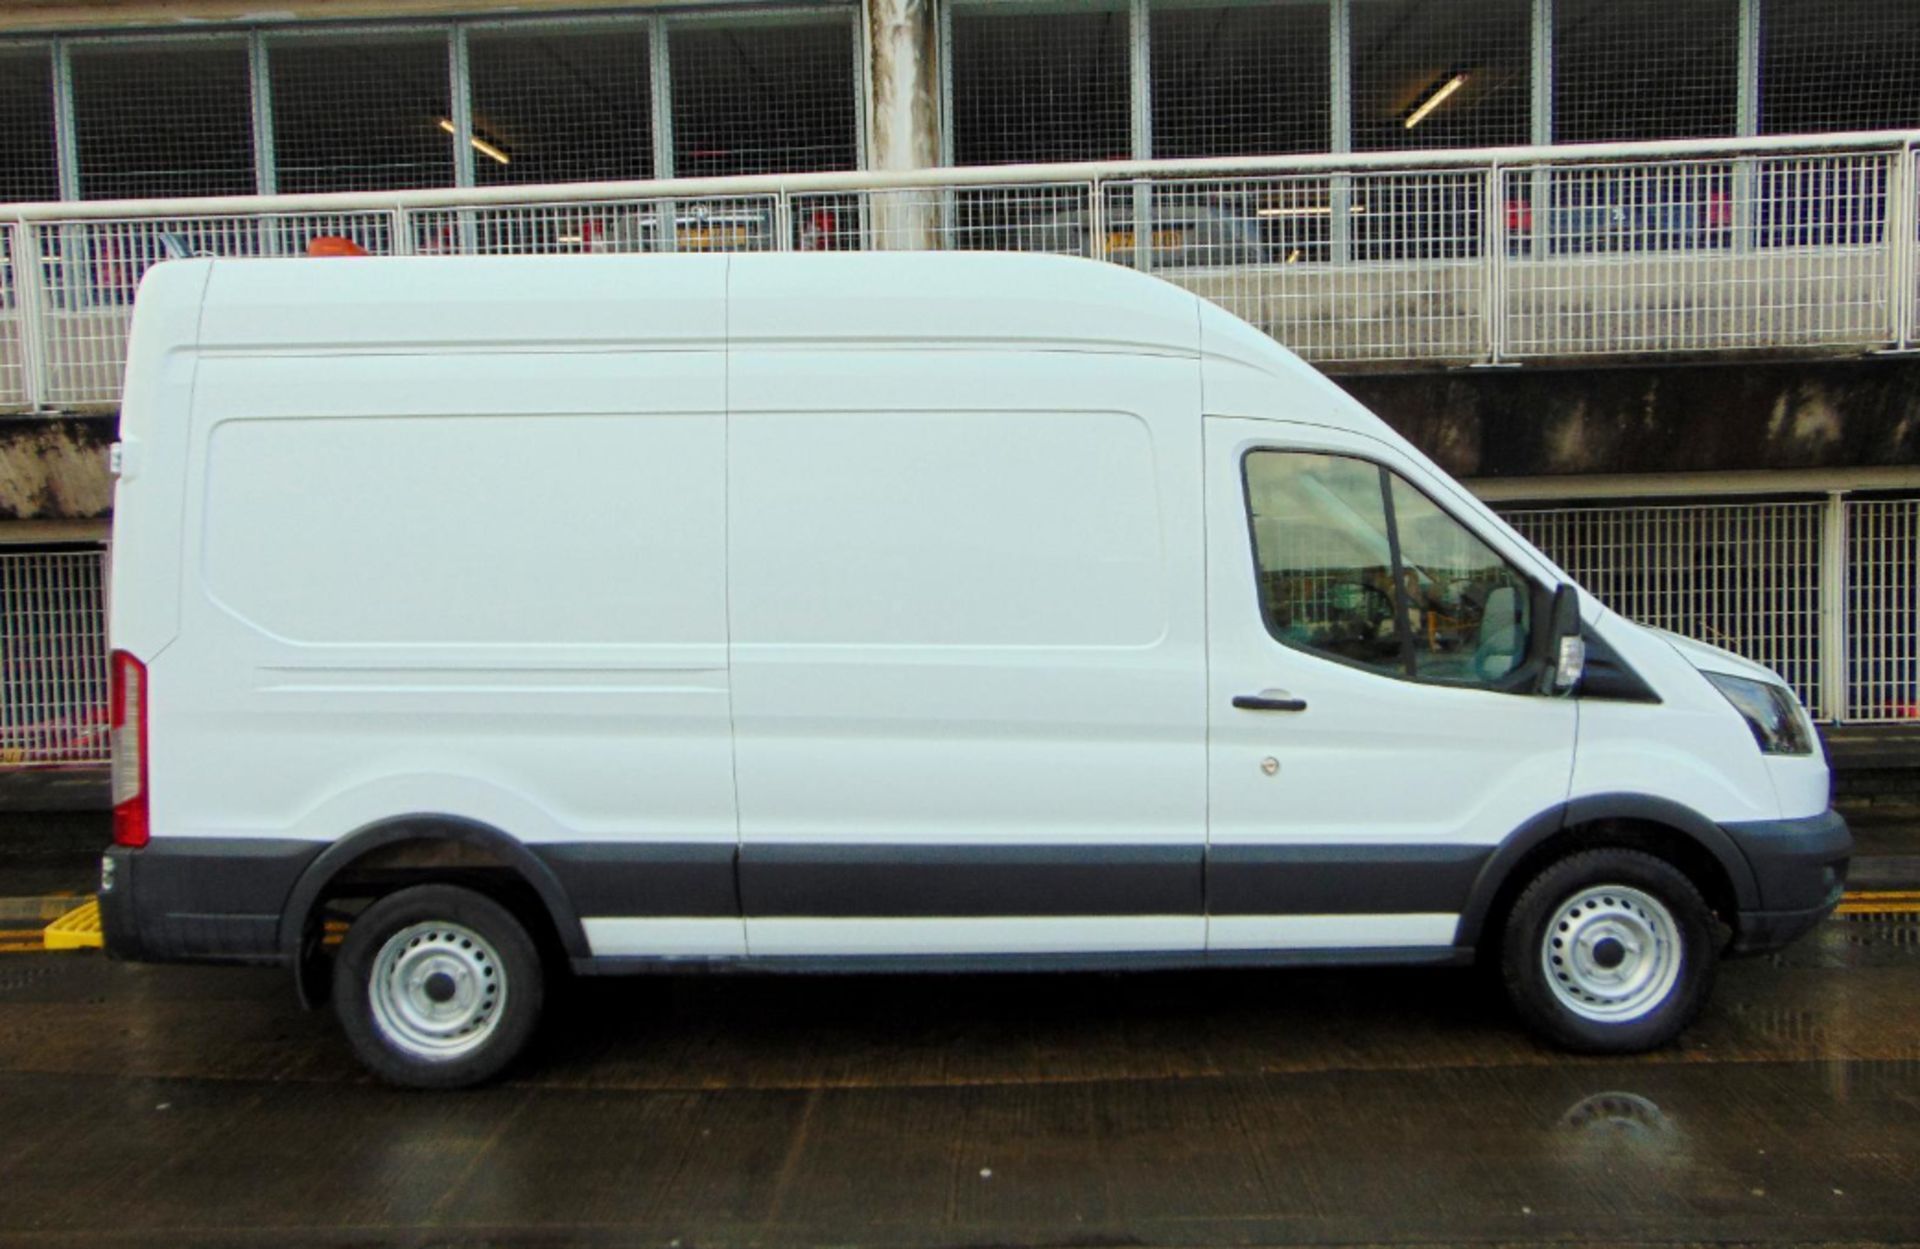 WORKHORSE ON WHEELS: FORD TRANSIT 2018, MANUAL, DIESEL, 3 SEATS, SERVICE HISTORY - Image 6 of 17